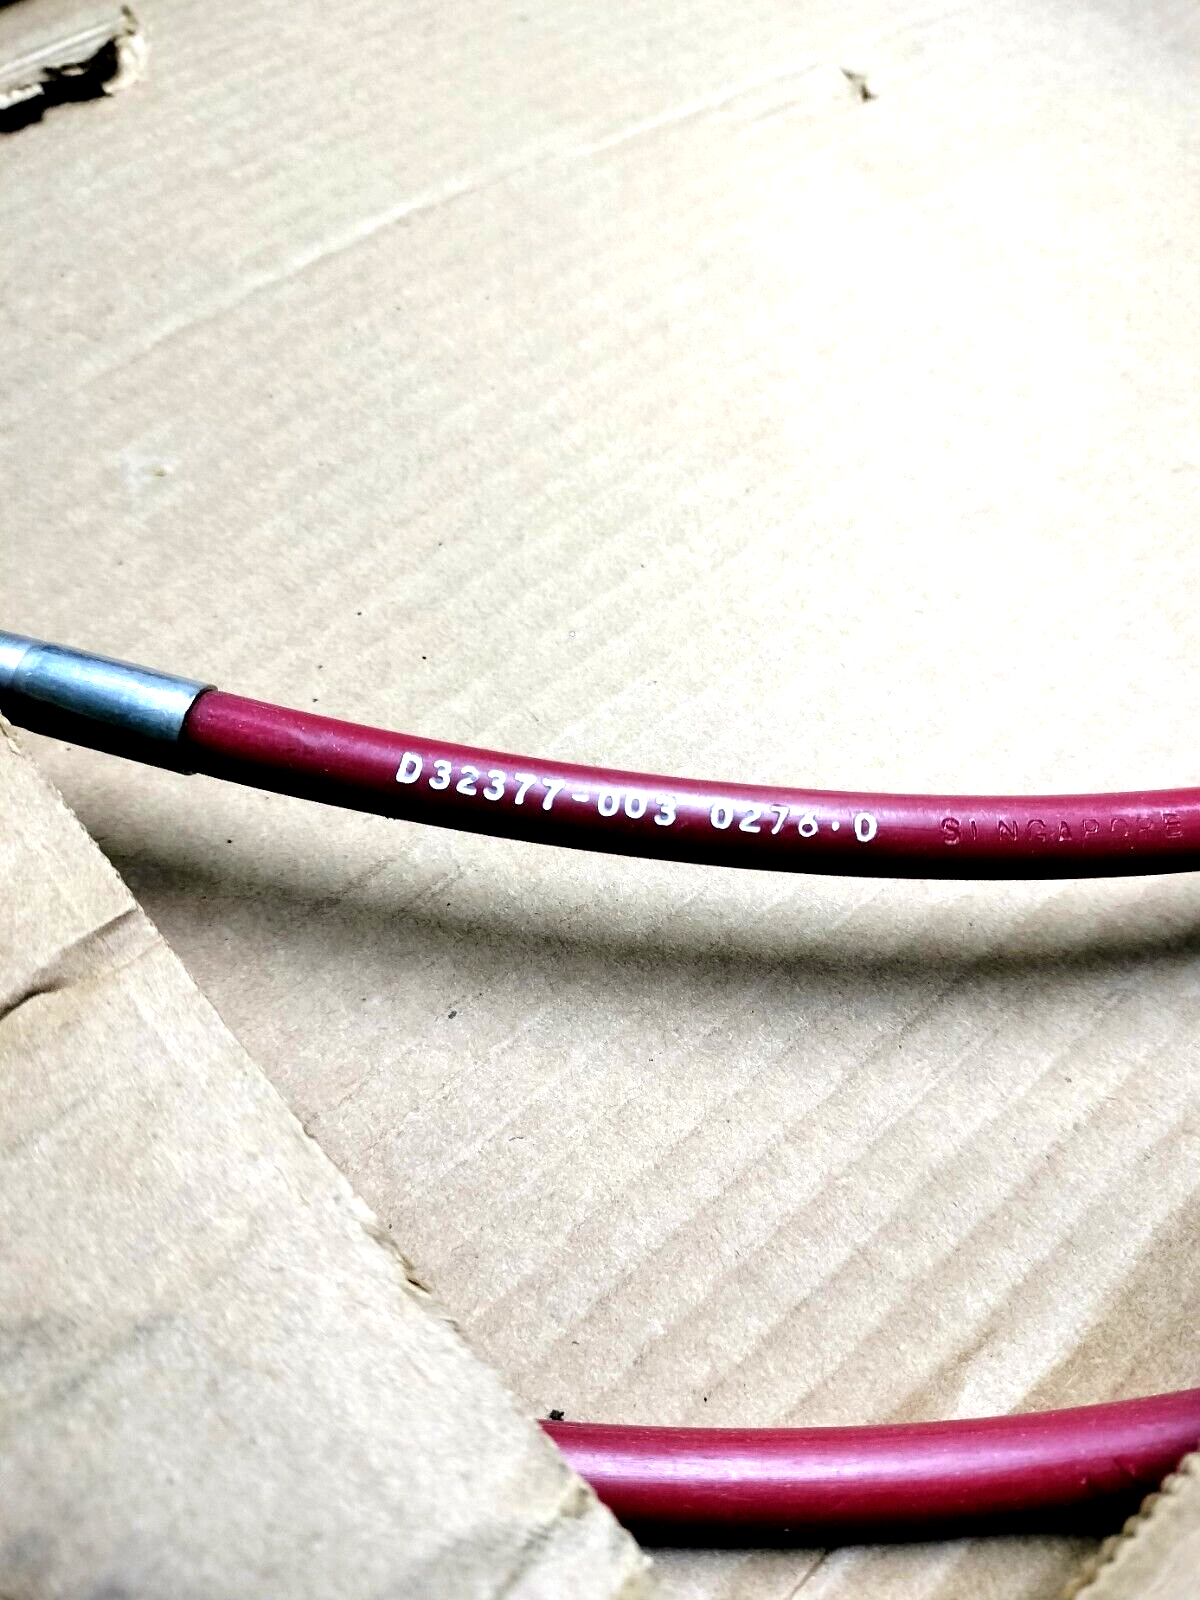 D32377-003 / MORSE RED JACKET CONTROL CABLE-  276 INCHES / 23 ft.  NEW IN BOX